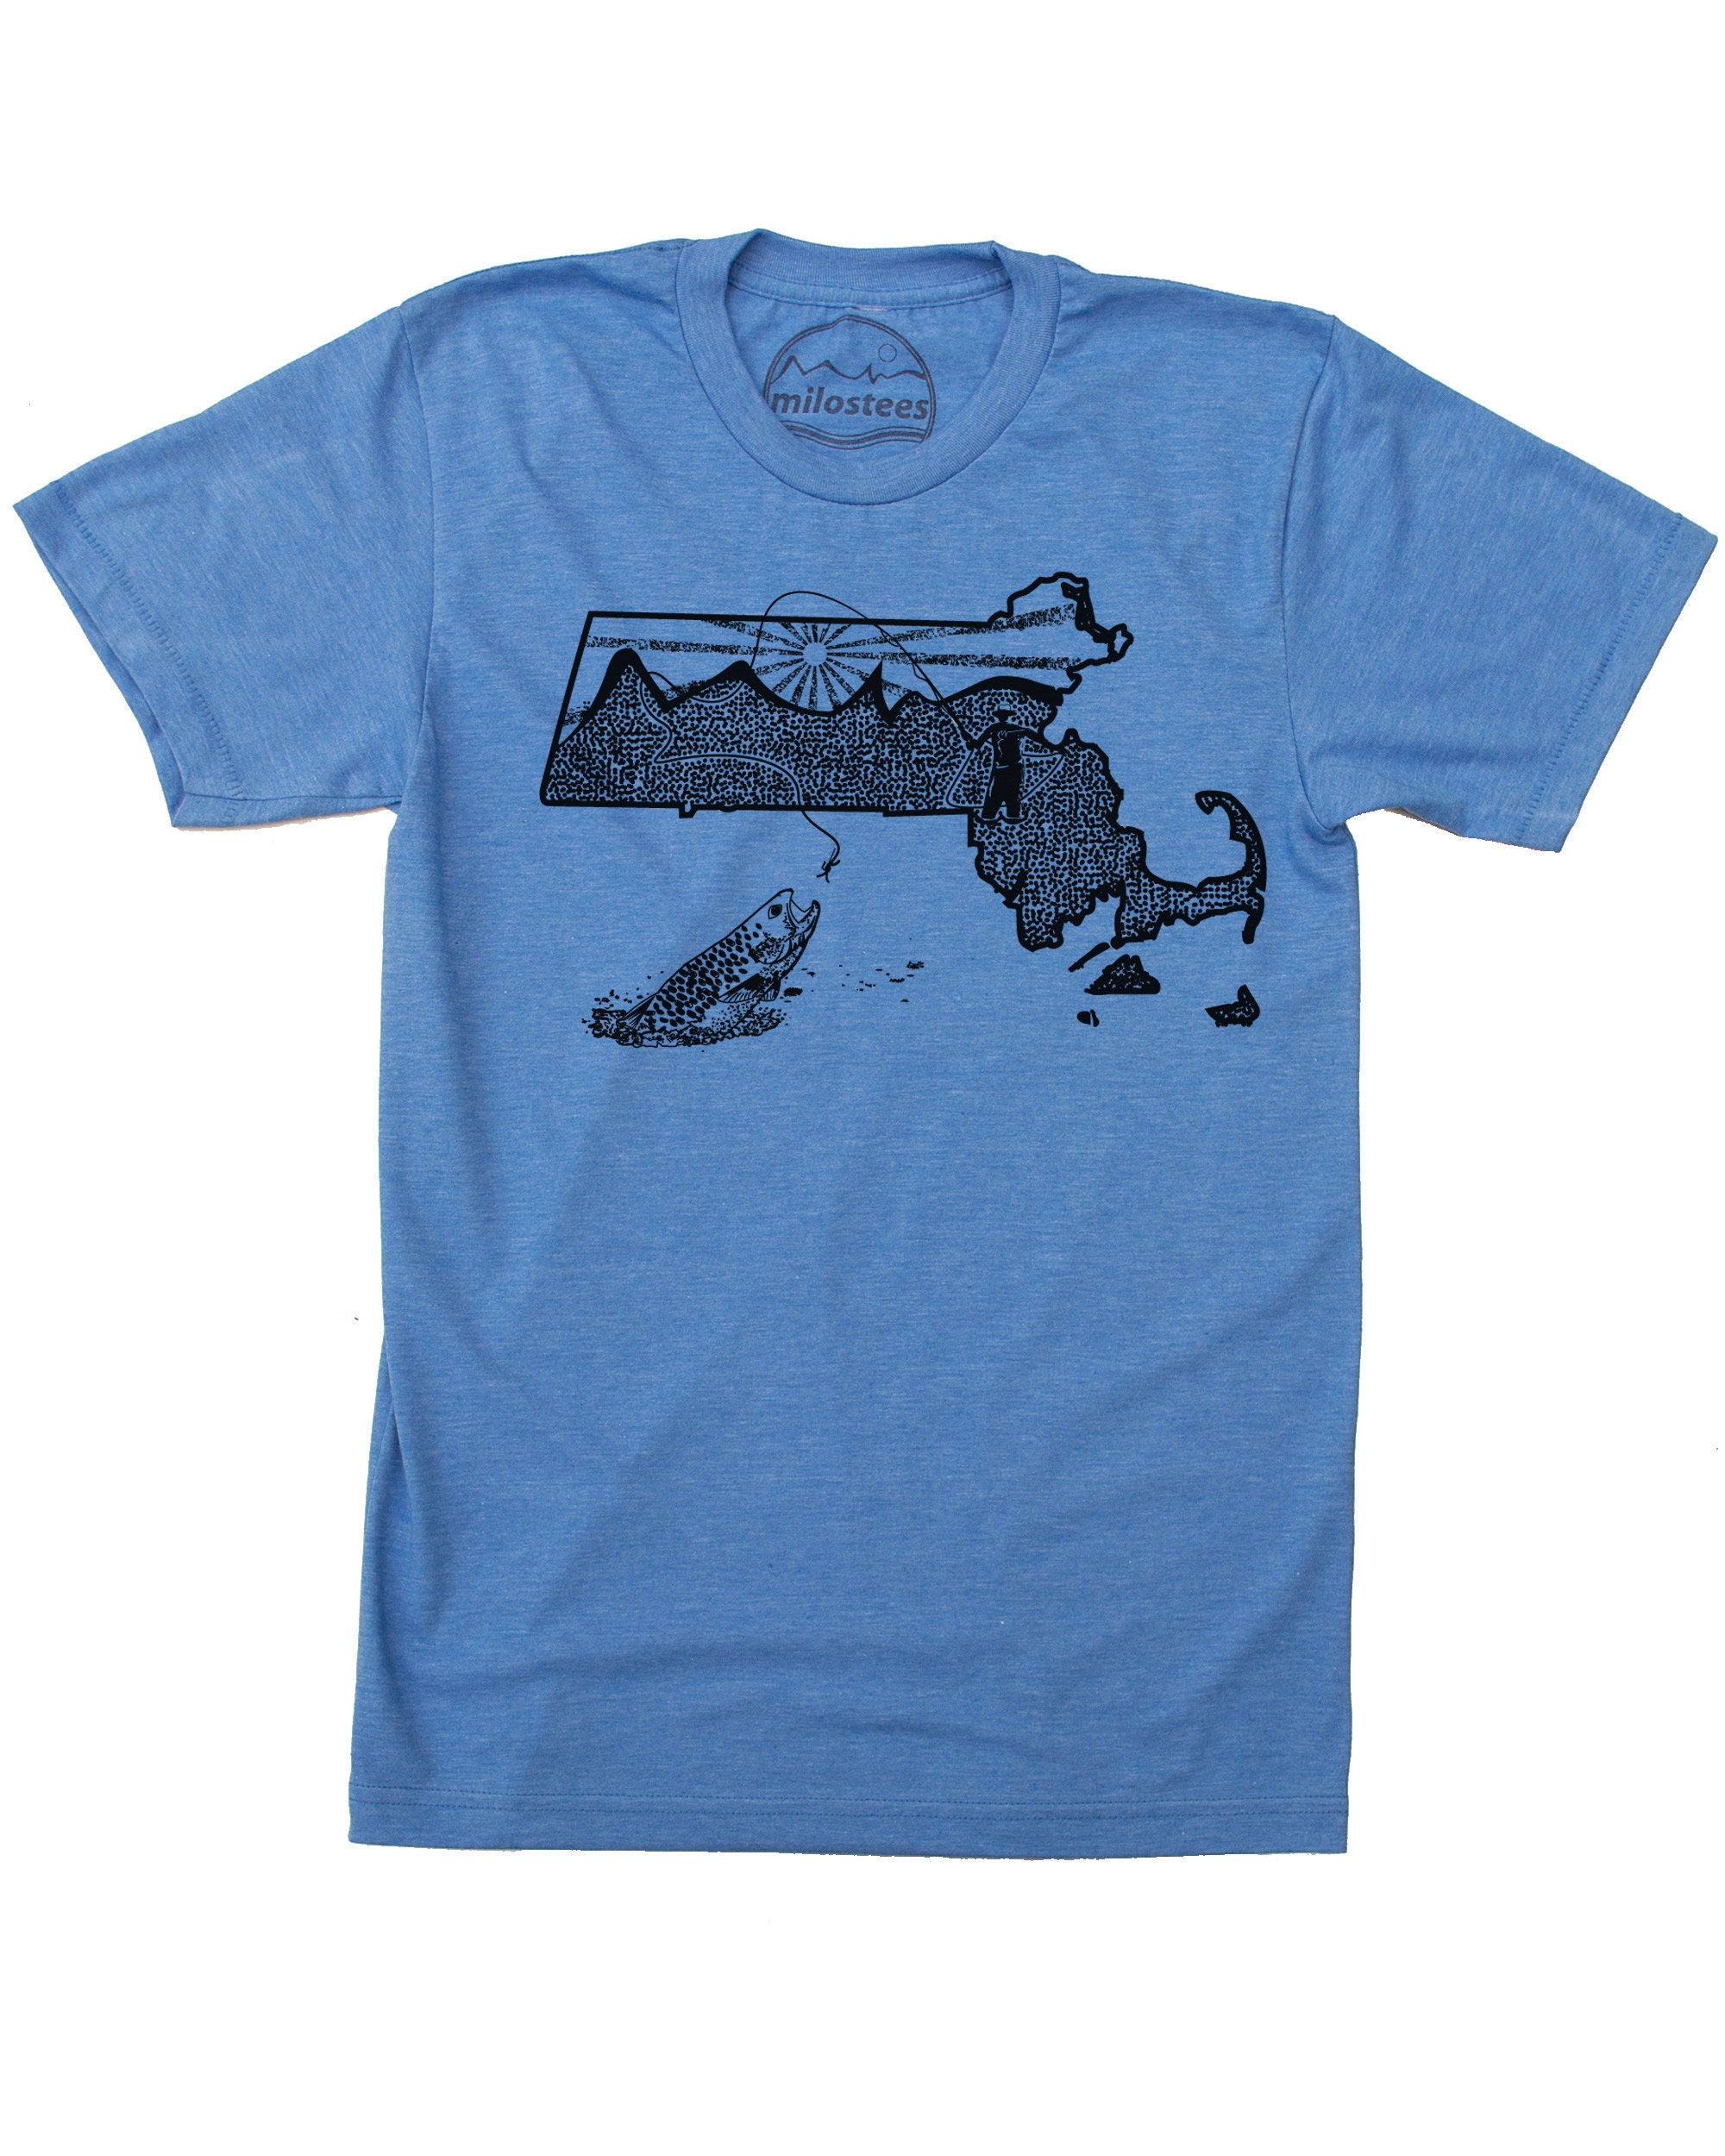 Massachusetts T-shirt, Wicked Tuna Style With Fly Fisherman